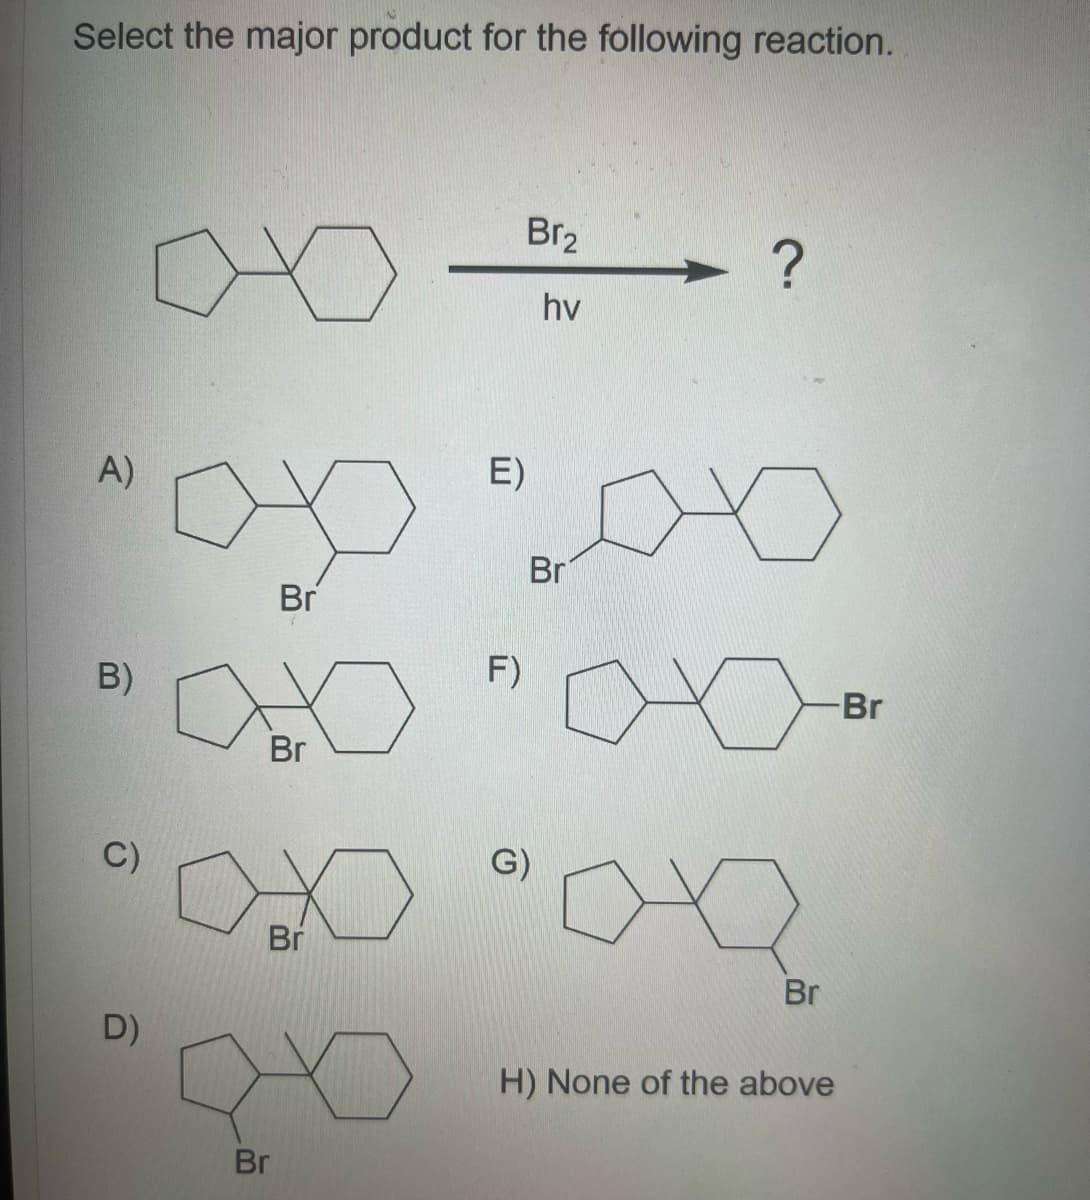 Select the major product for the following reaction.
A)
B)
D)
E)
0x00
Br
Br
Br
Br
Br
Br₂
hv
F)
?
G)
Br
-Br
H) None of the above